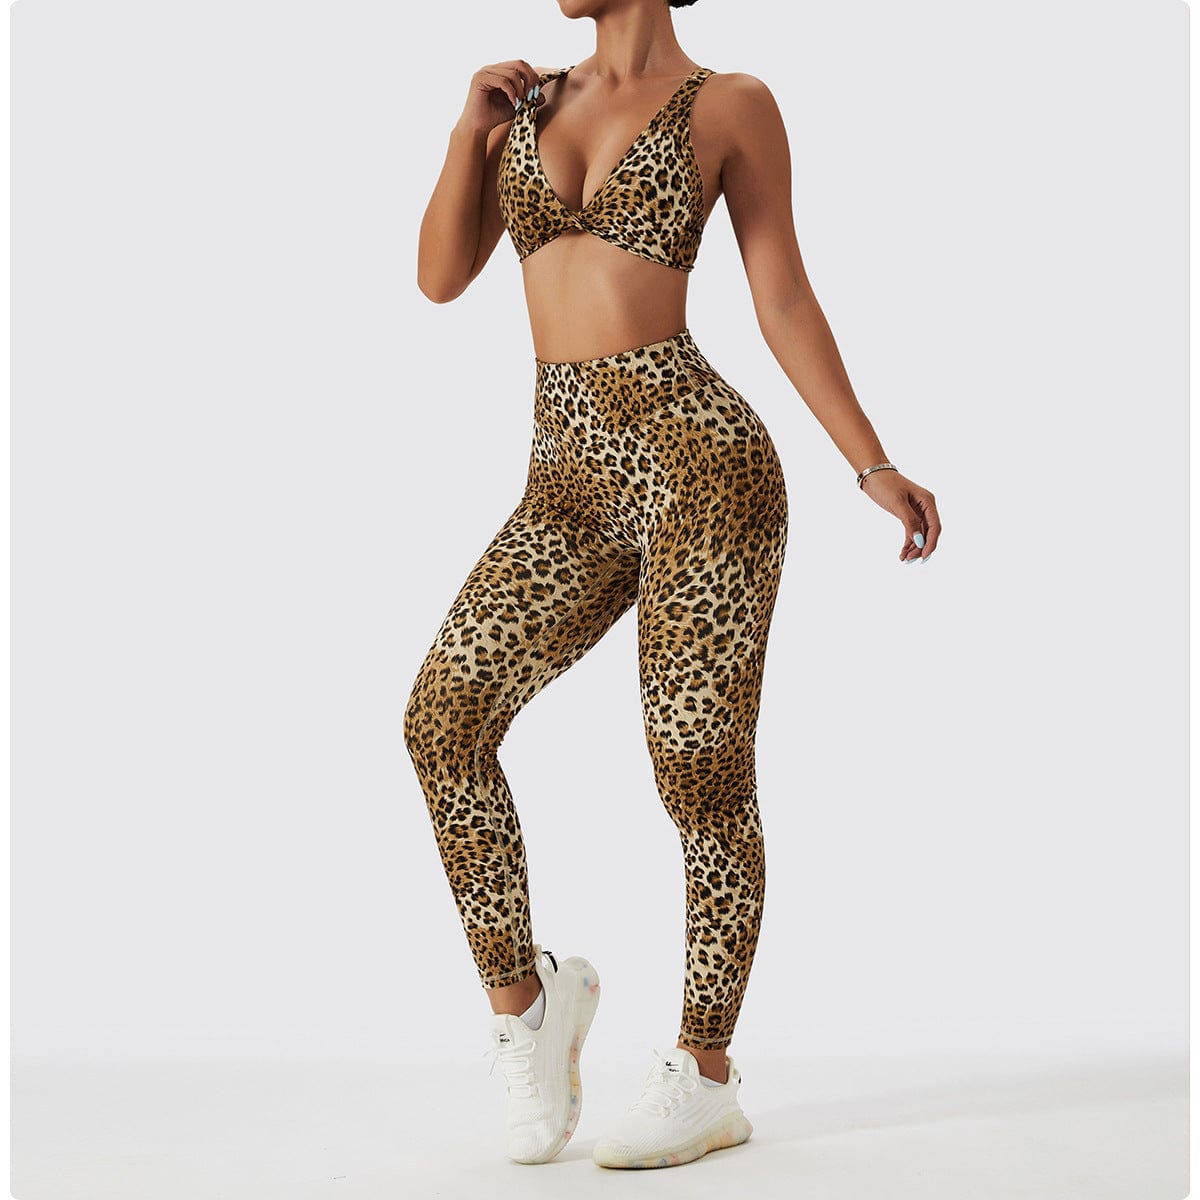 VOYLE Women Two-Piece Outfits Sexy Leopard Print Sports Bra and Legging Set  for Active Wear,Brown,XL : Clothing, Shoes & Jewelry 